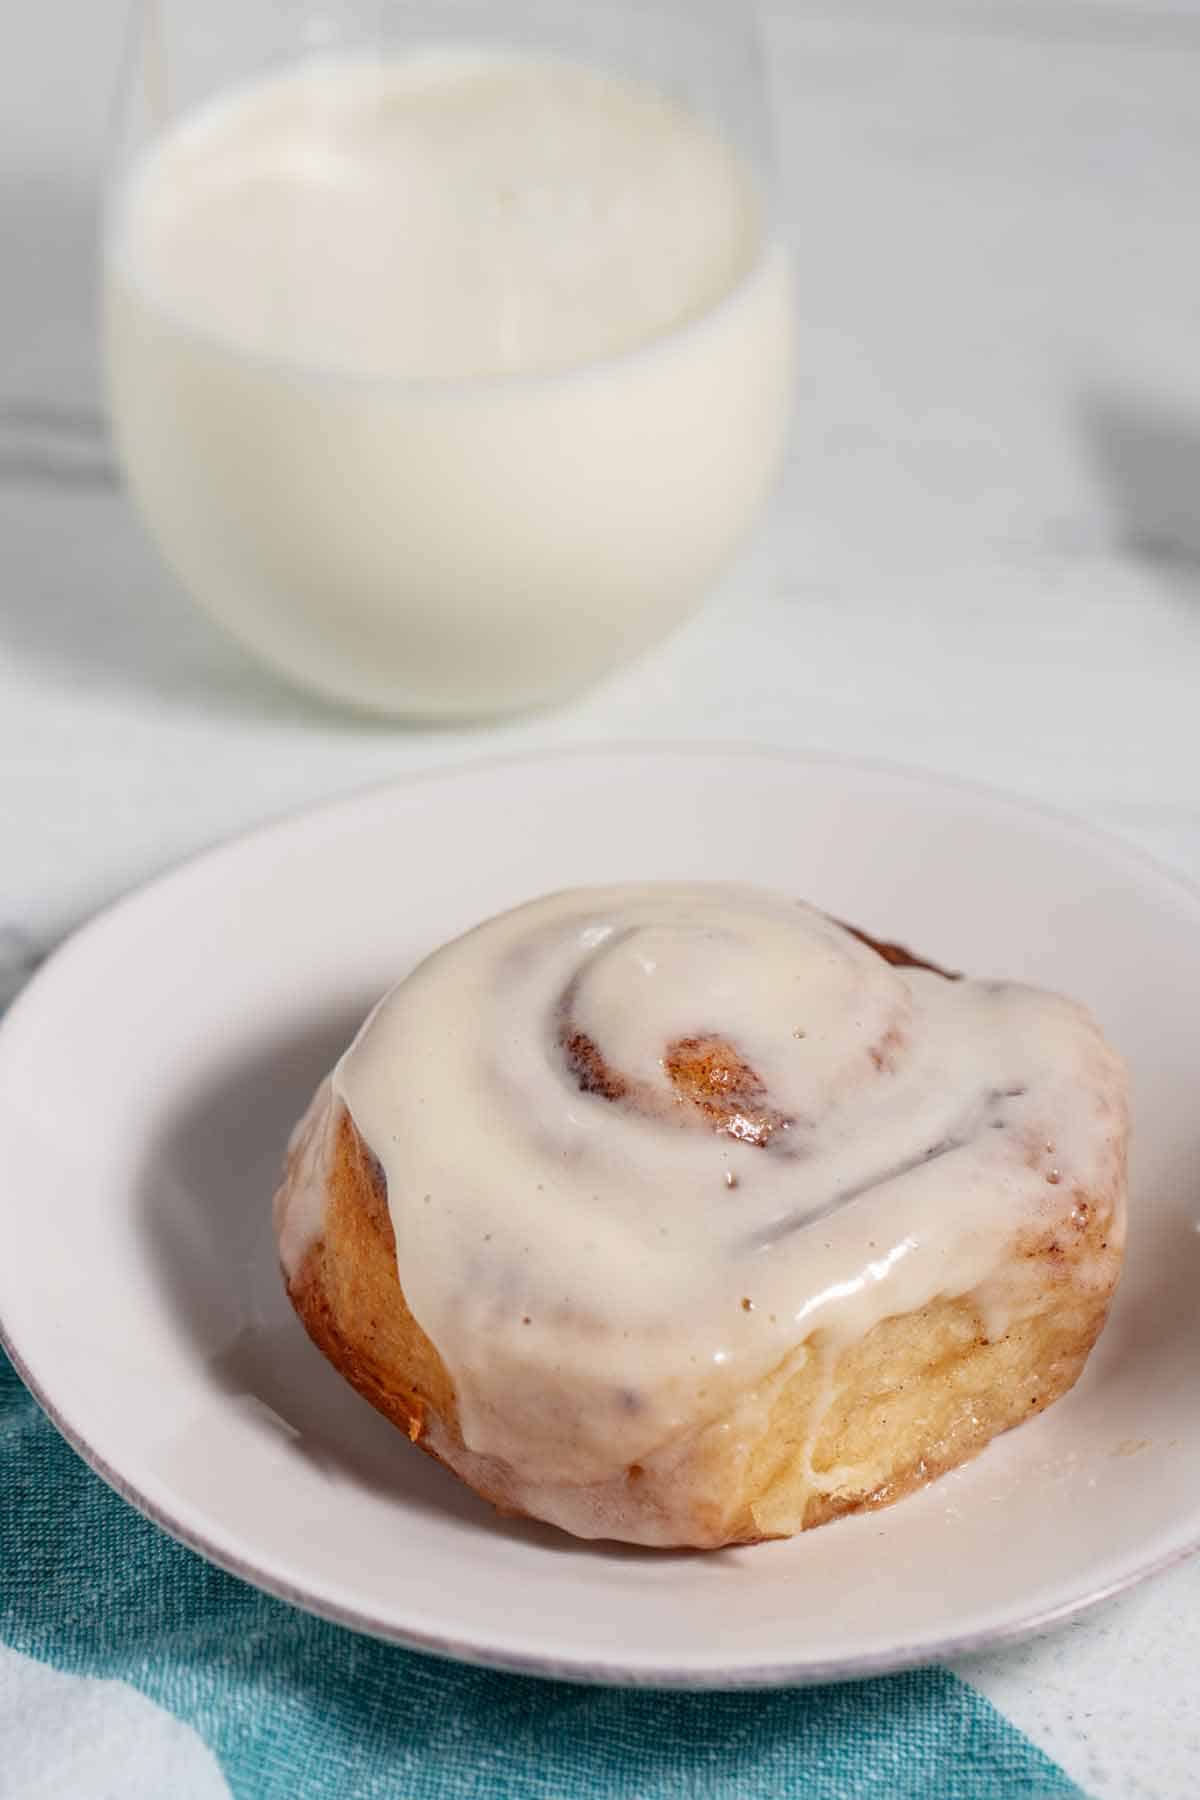 Cinnamon roll with icing on a plate and glass of milk in the background.